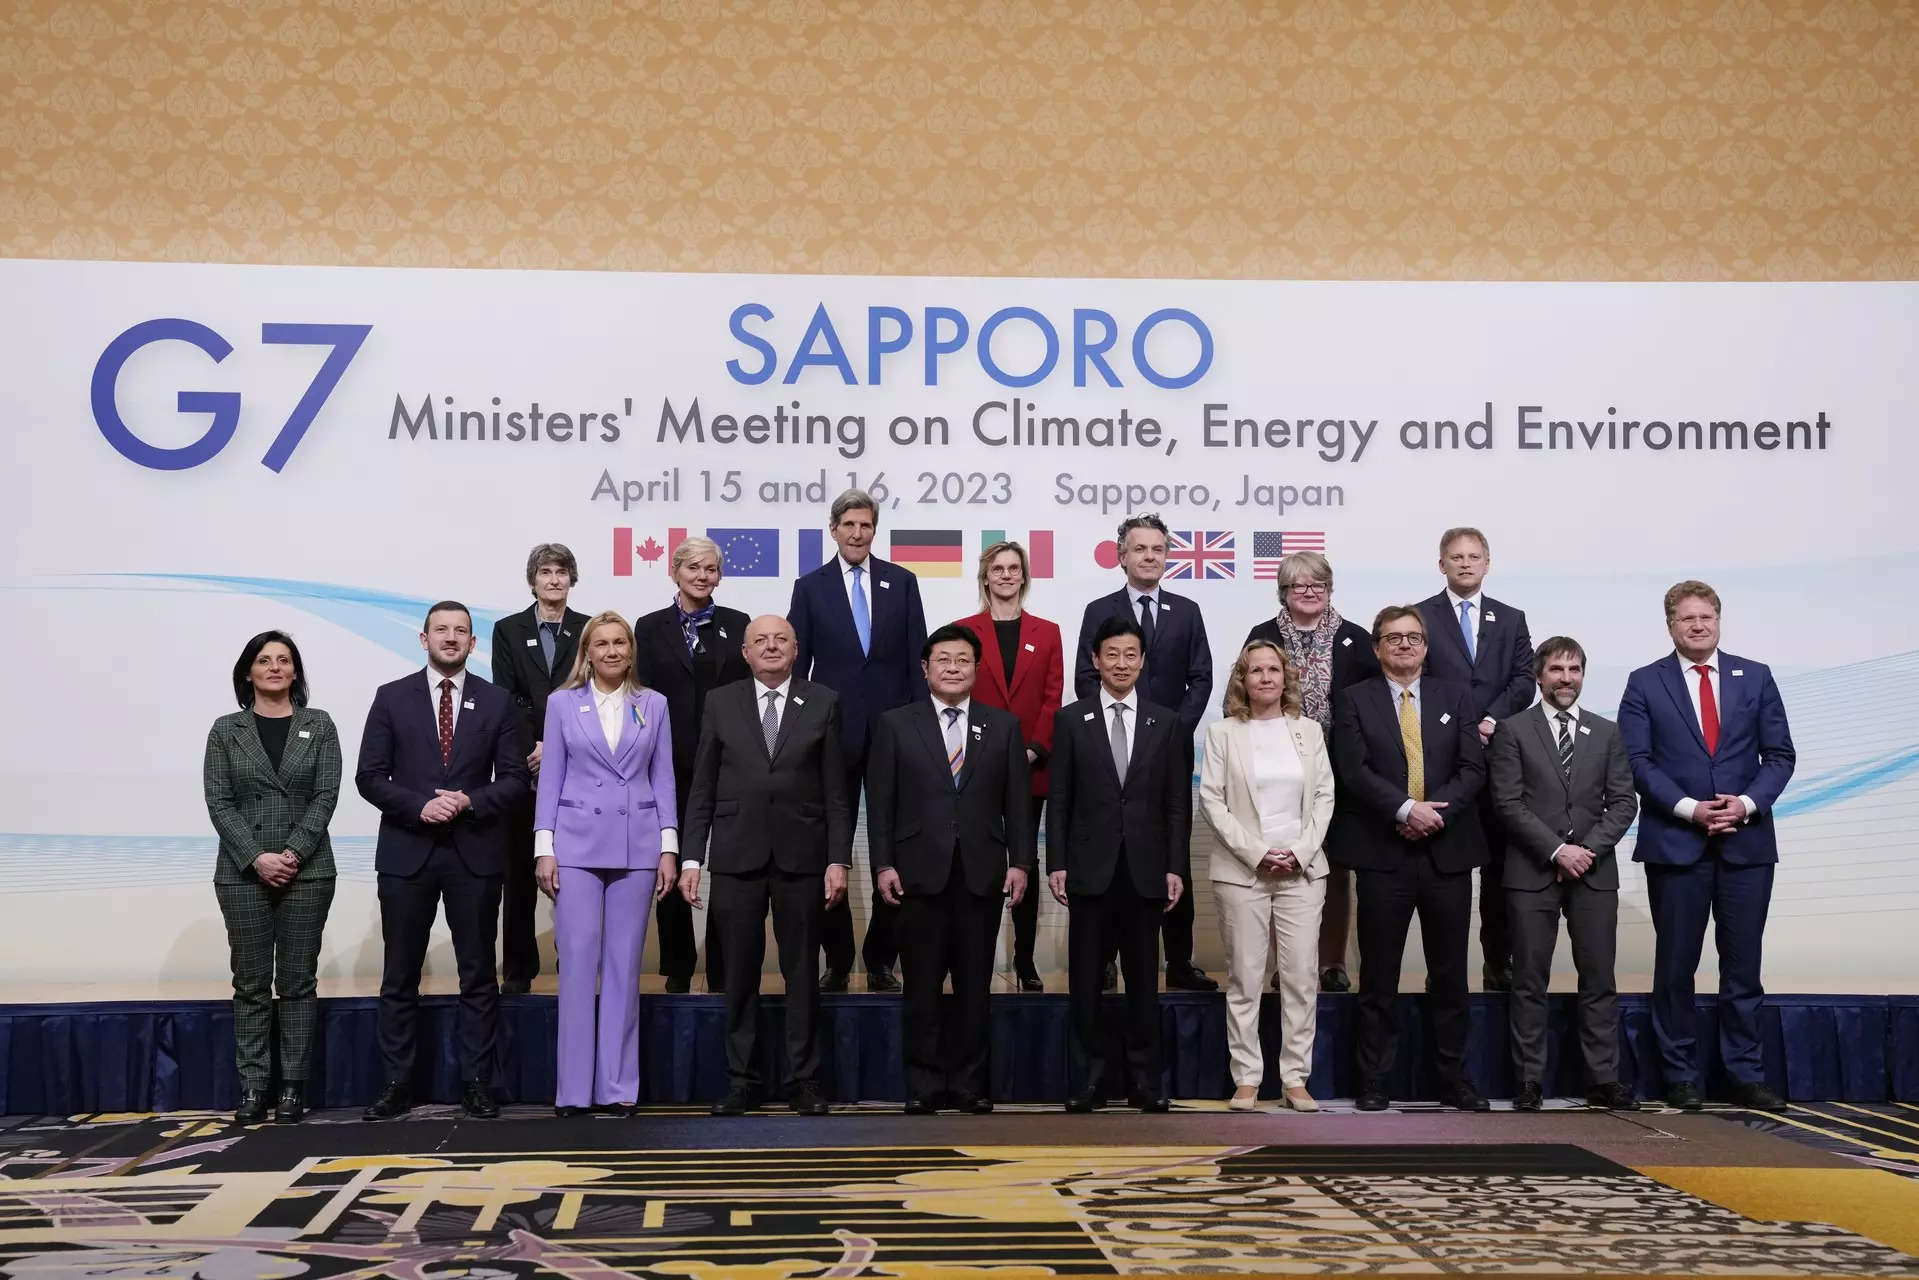 G7 conference was held in Sapporo, Japan/